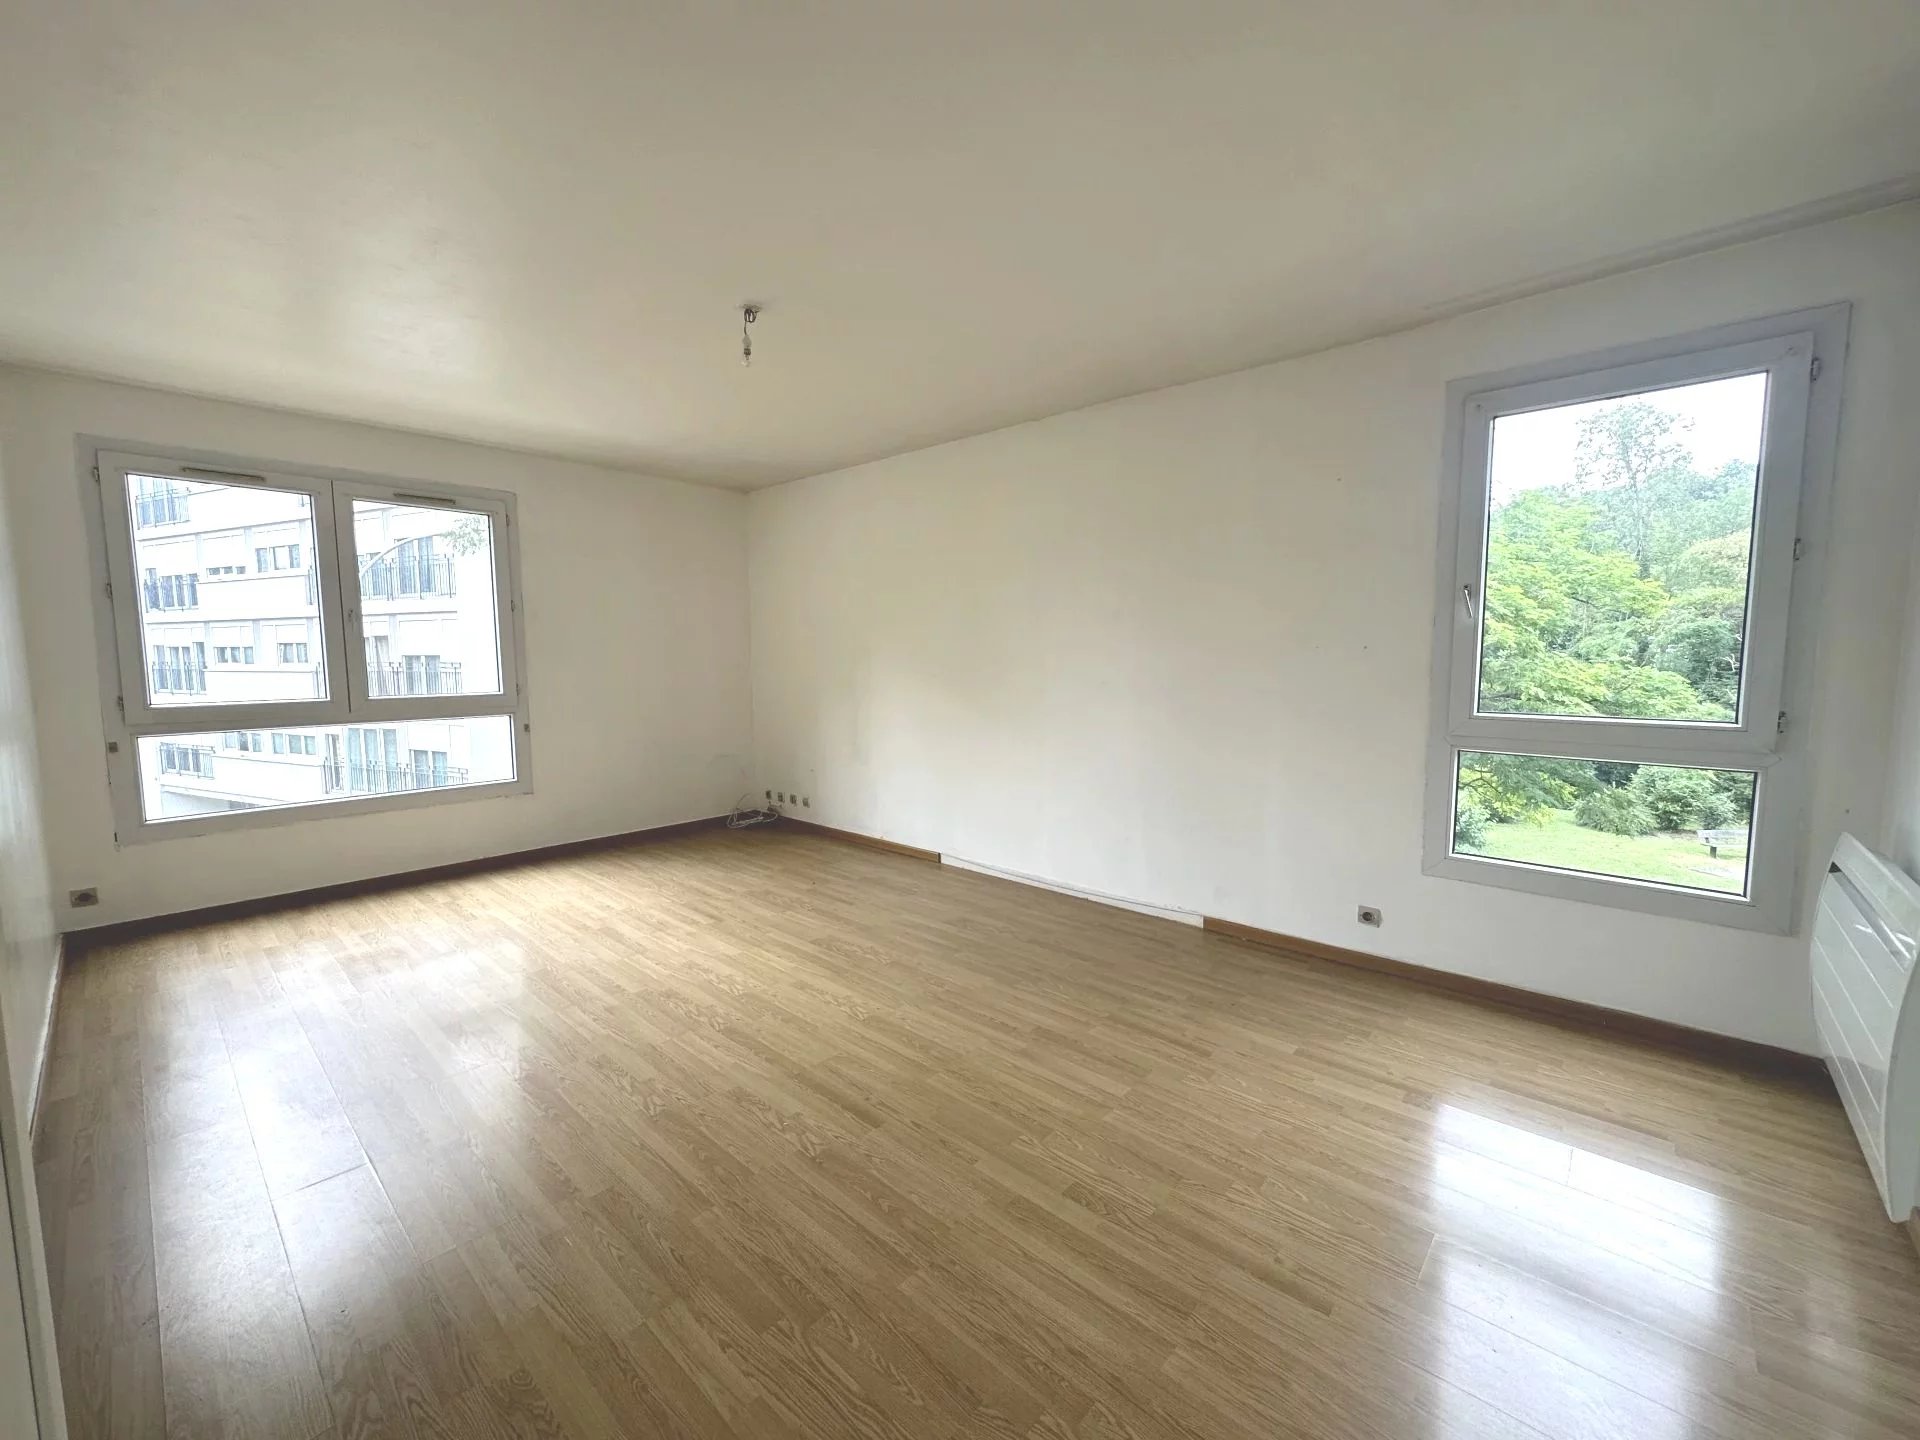 VENTE APPARTEMENT – F3 – ATHIS-MONS